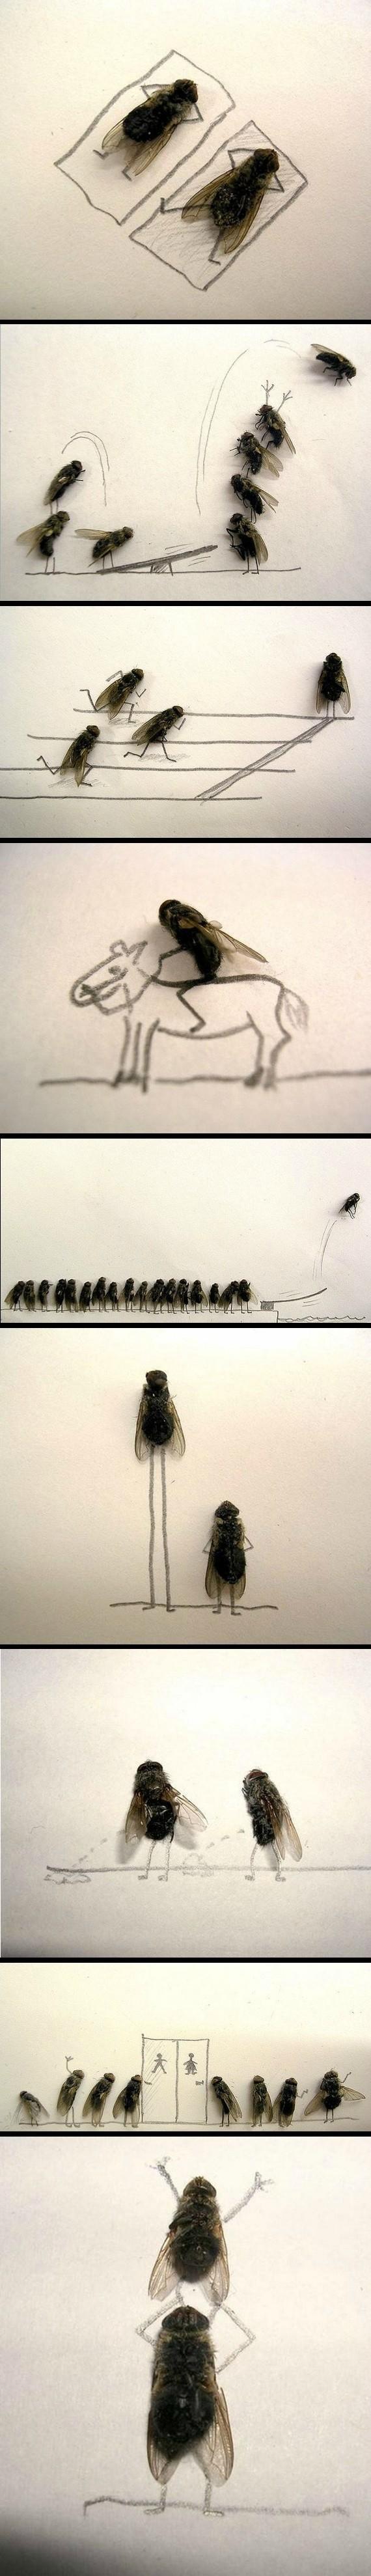 Reddit user <a href="http://www.reddit.com/r/funny/comments/1cm5rz/ever_been_this_bored/" target="_blank">SerialVandal</a> was pretty bored, so they used some dead bugs as inspiration for a morbid, but hilarious, art project.